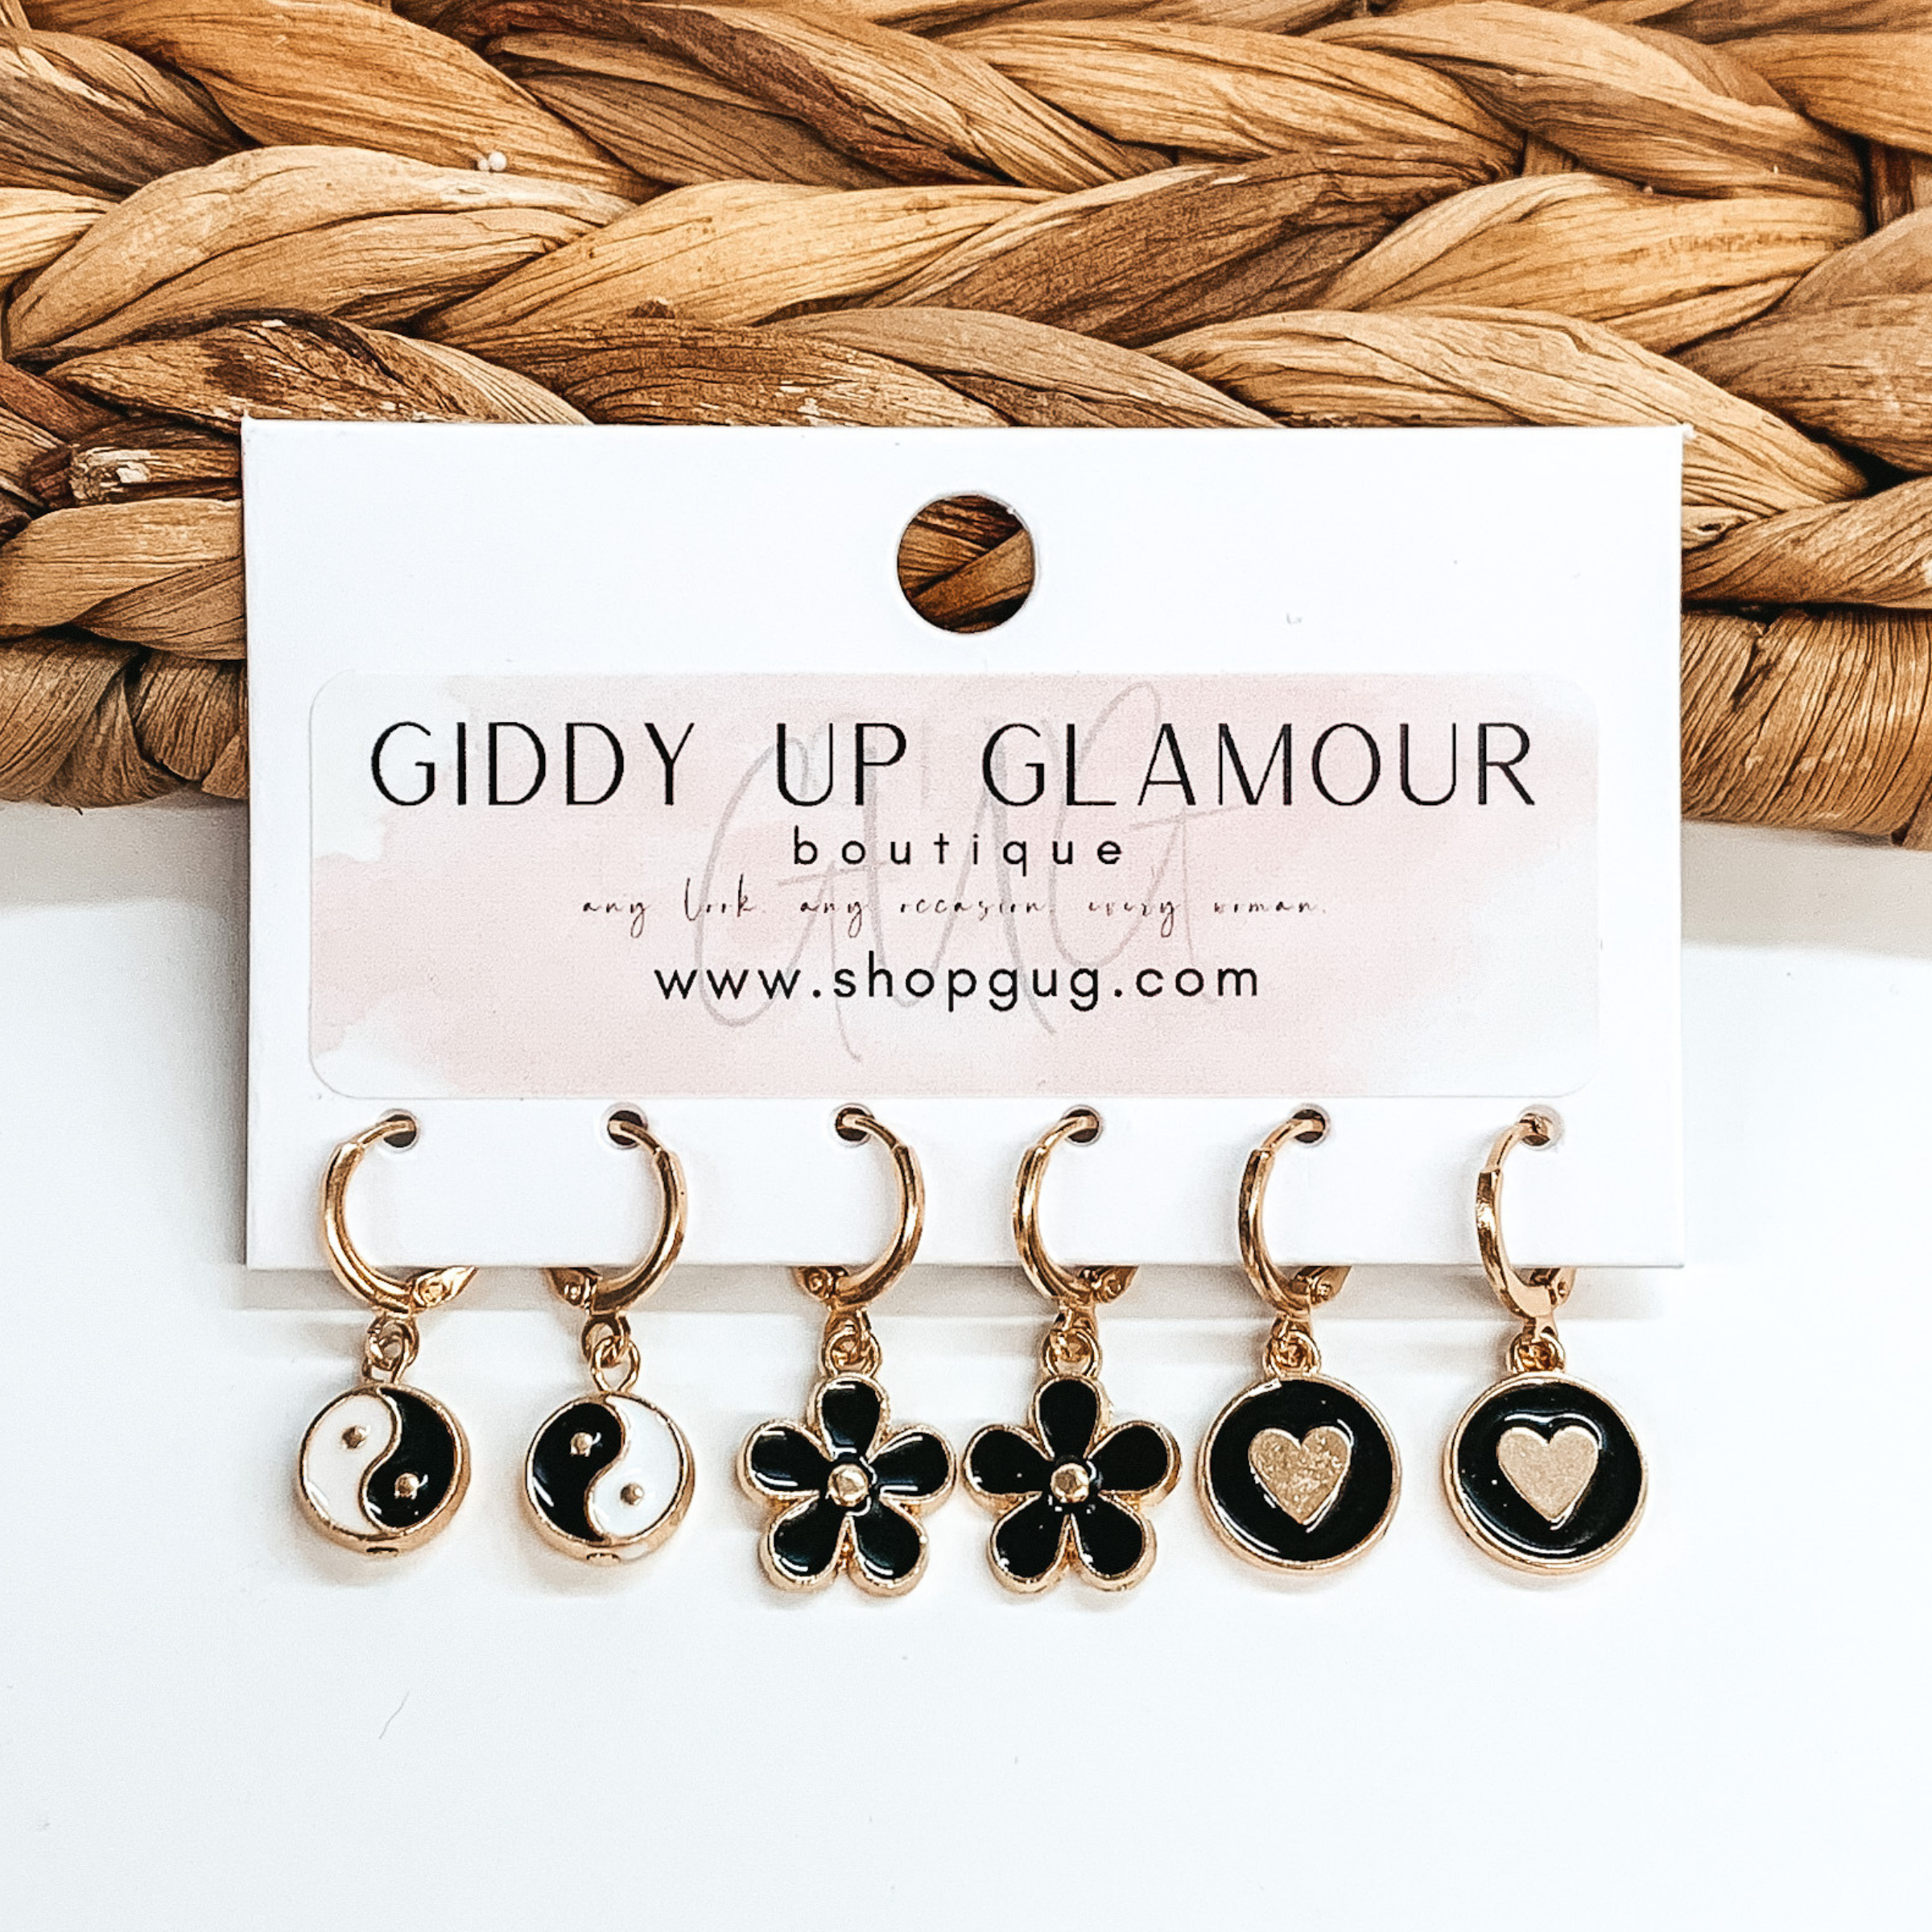 Set of three gold hoop earrings each with a different pendant. The pendants include black and white ying and yang circle pendants, black flower pendants, and black circle pendants with gold hearts in the center. These earrings are pictured on a white card holder on a white background with basket weave in the background. 